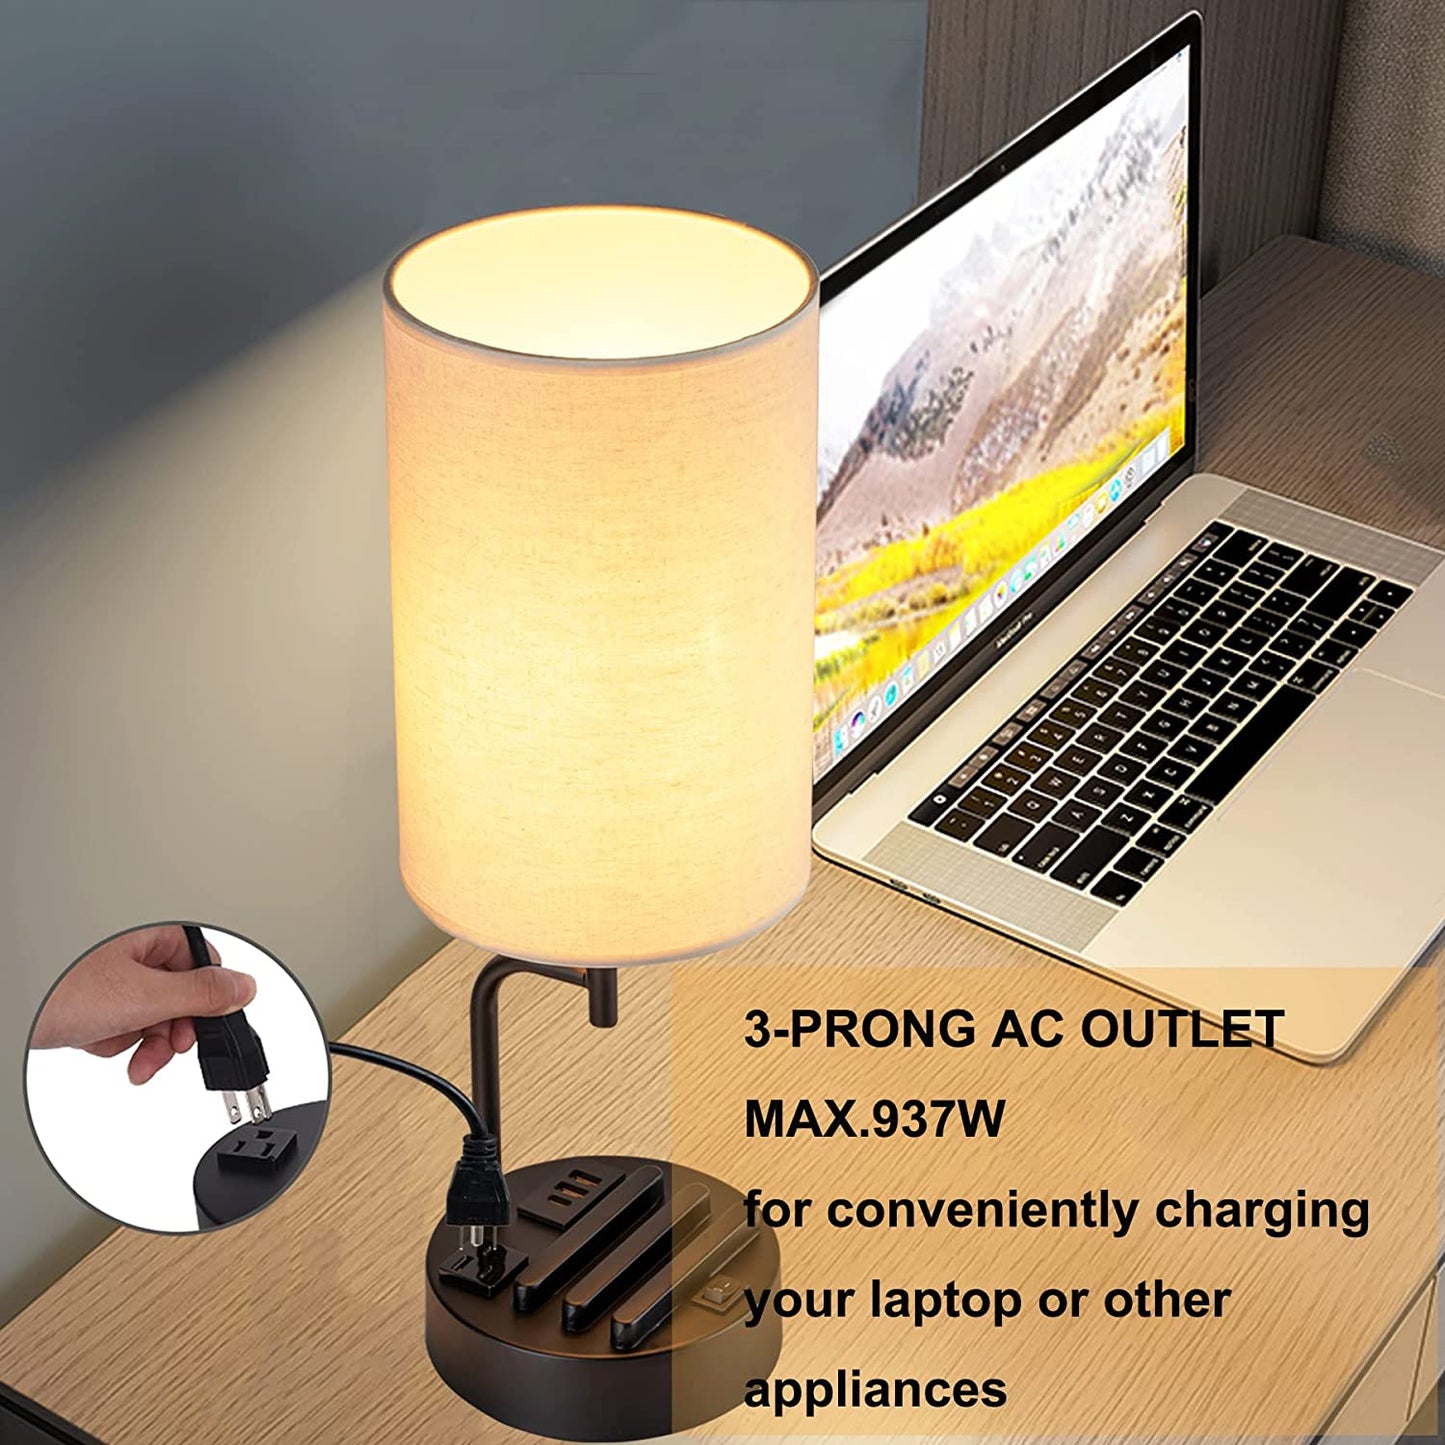 Table Lamp with 3 USB Charging Ports, Modern with AC Outlet and Phone Stands, Cream